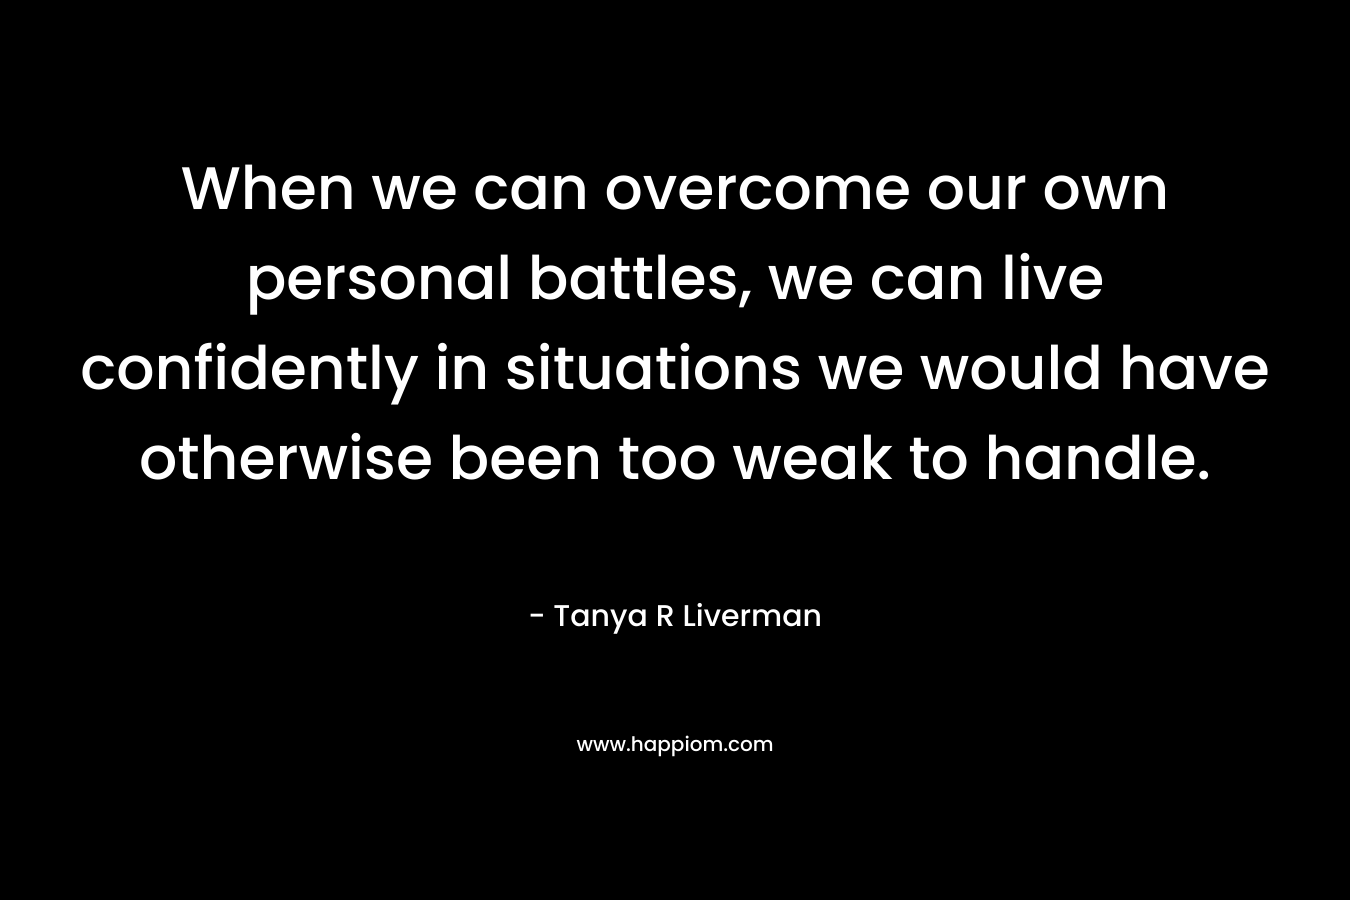 When we can overcome our own personal battles, we can live confidently in situations we would have otherwise been too weak to handle.